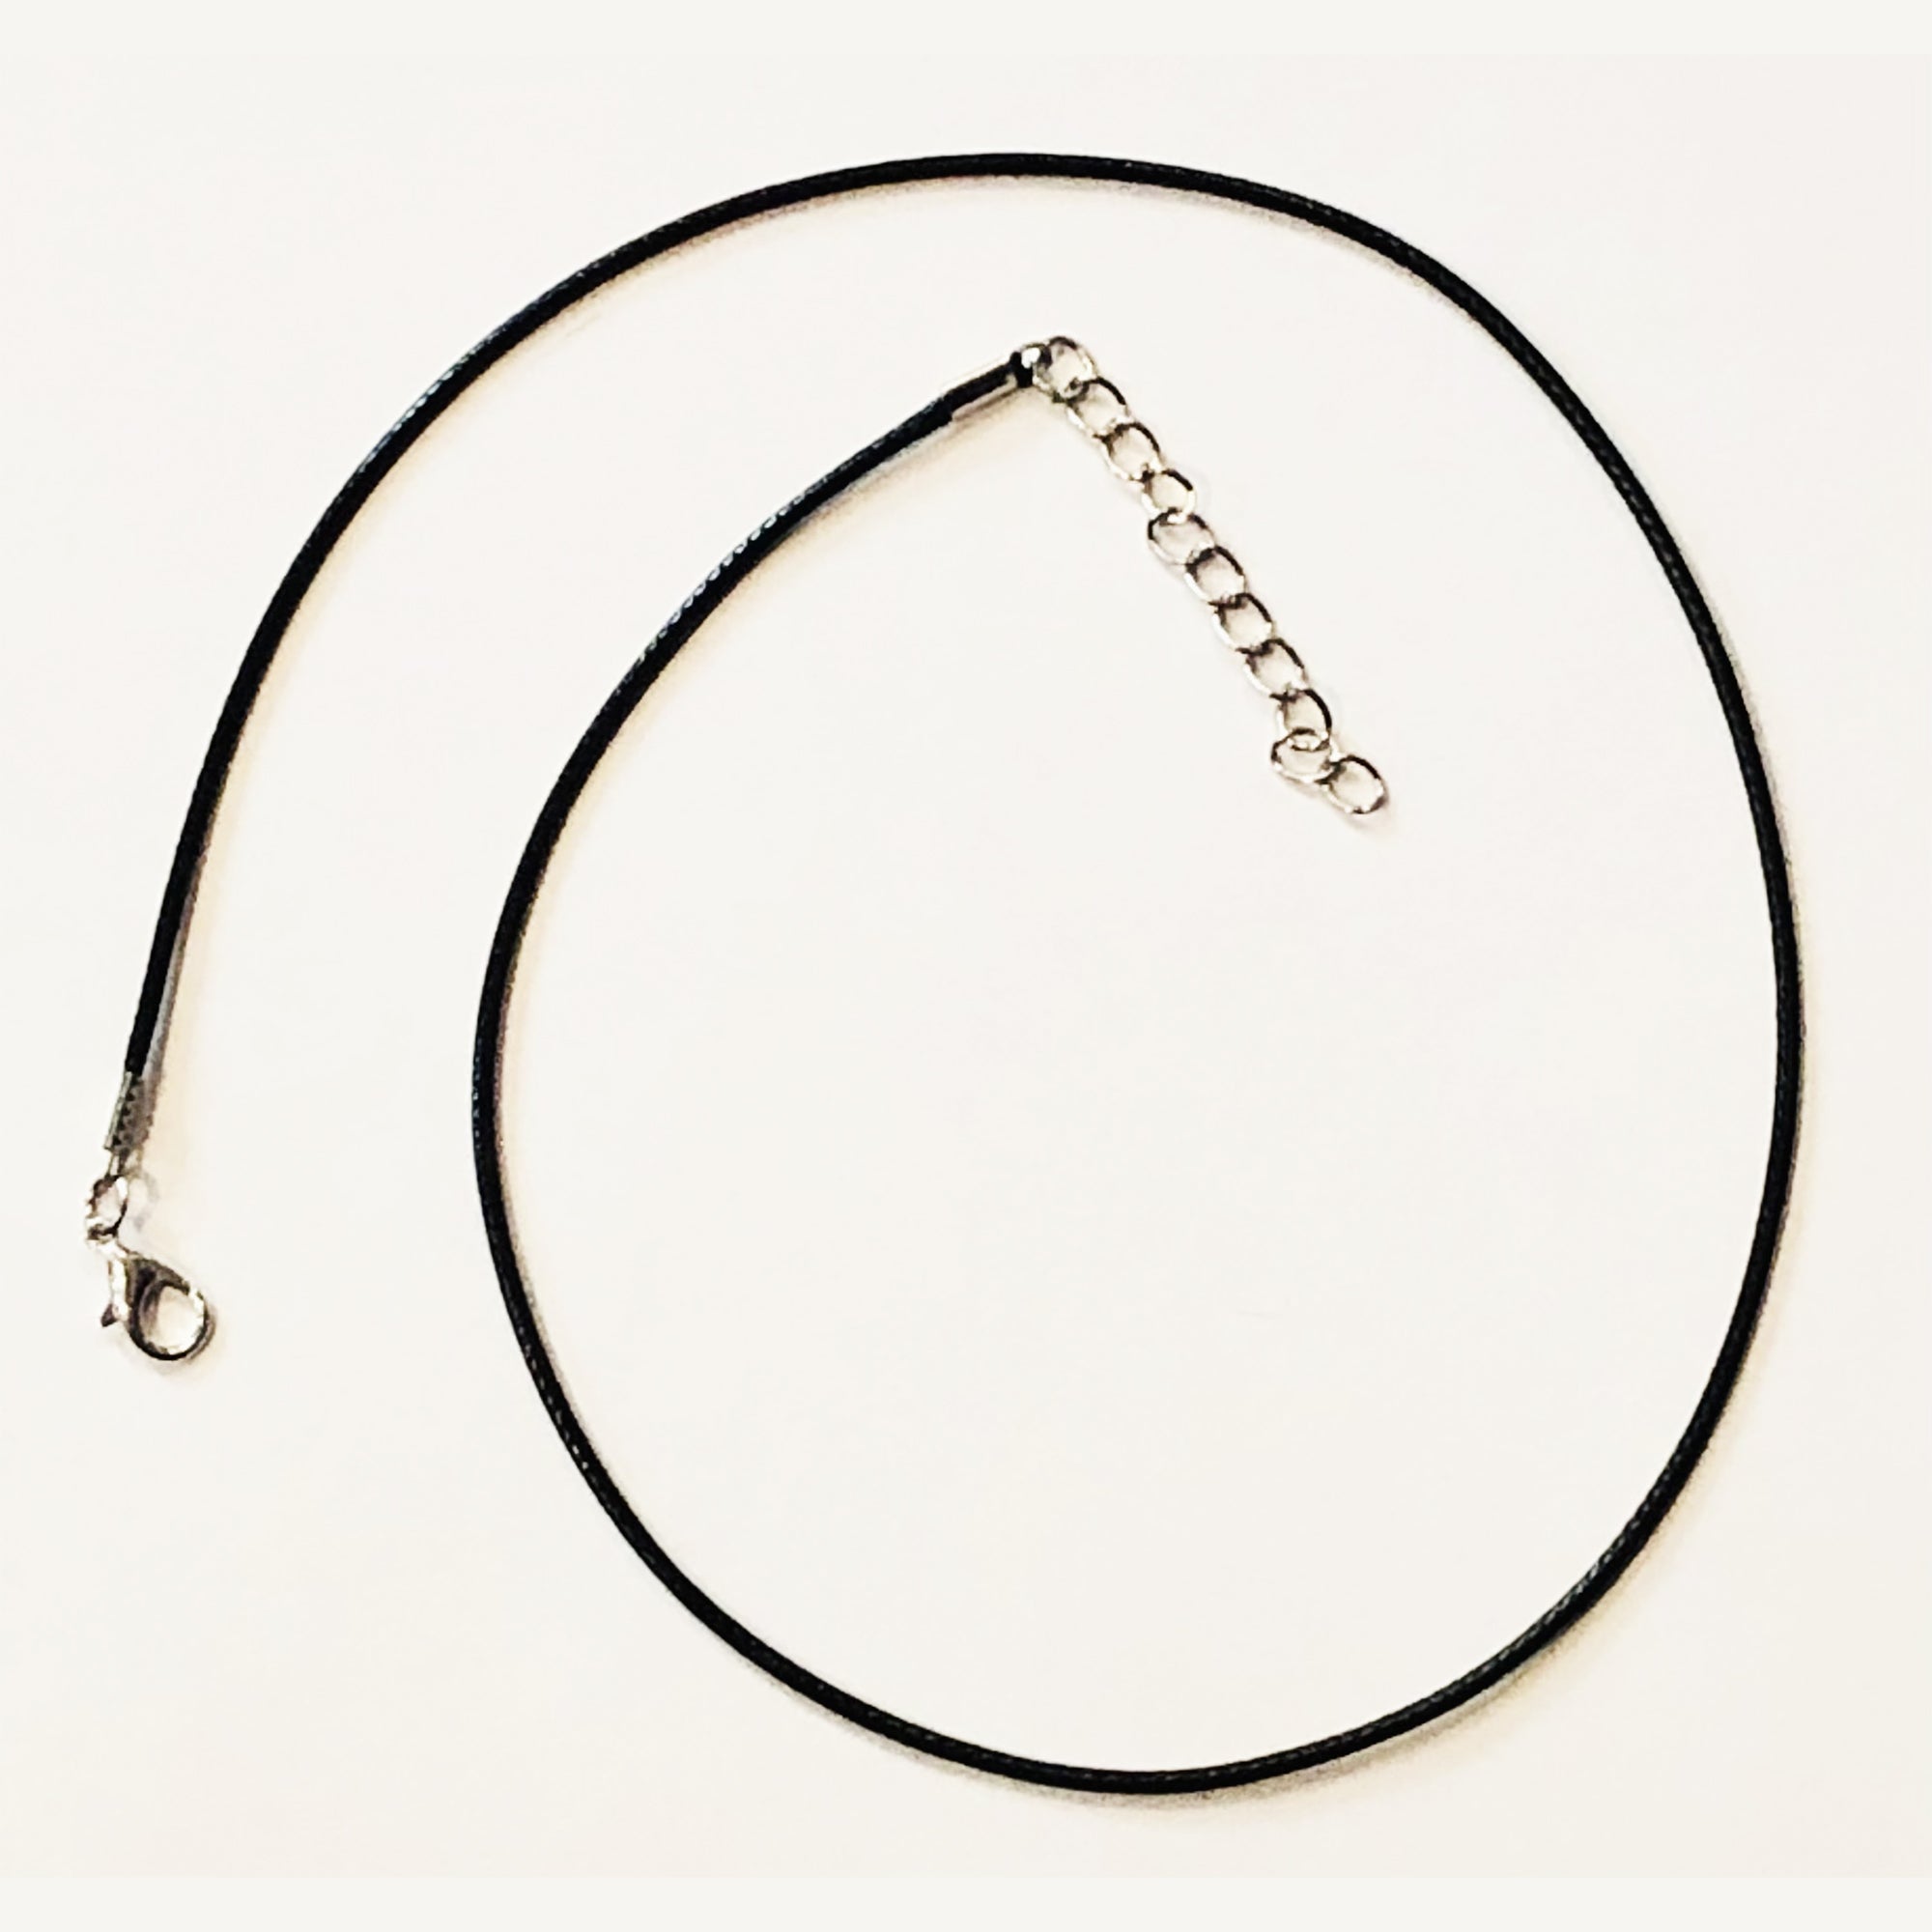 CH.AMZ.0500 - 18 Inch Necklace Cord